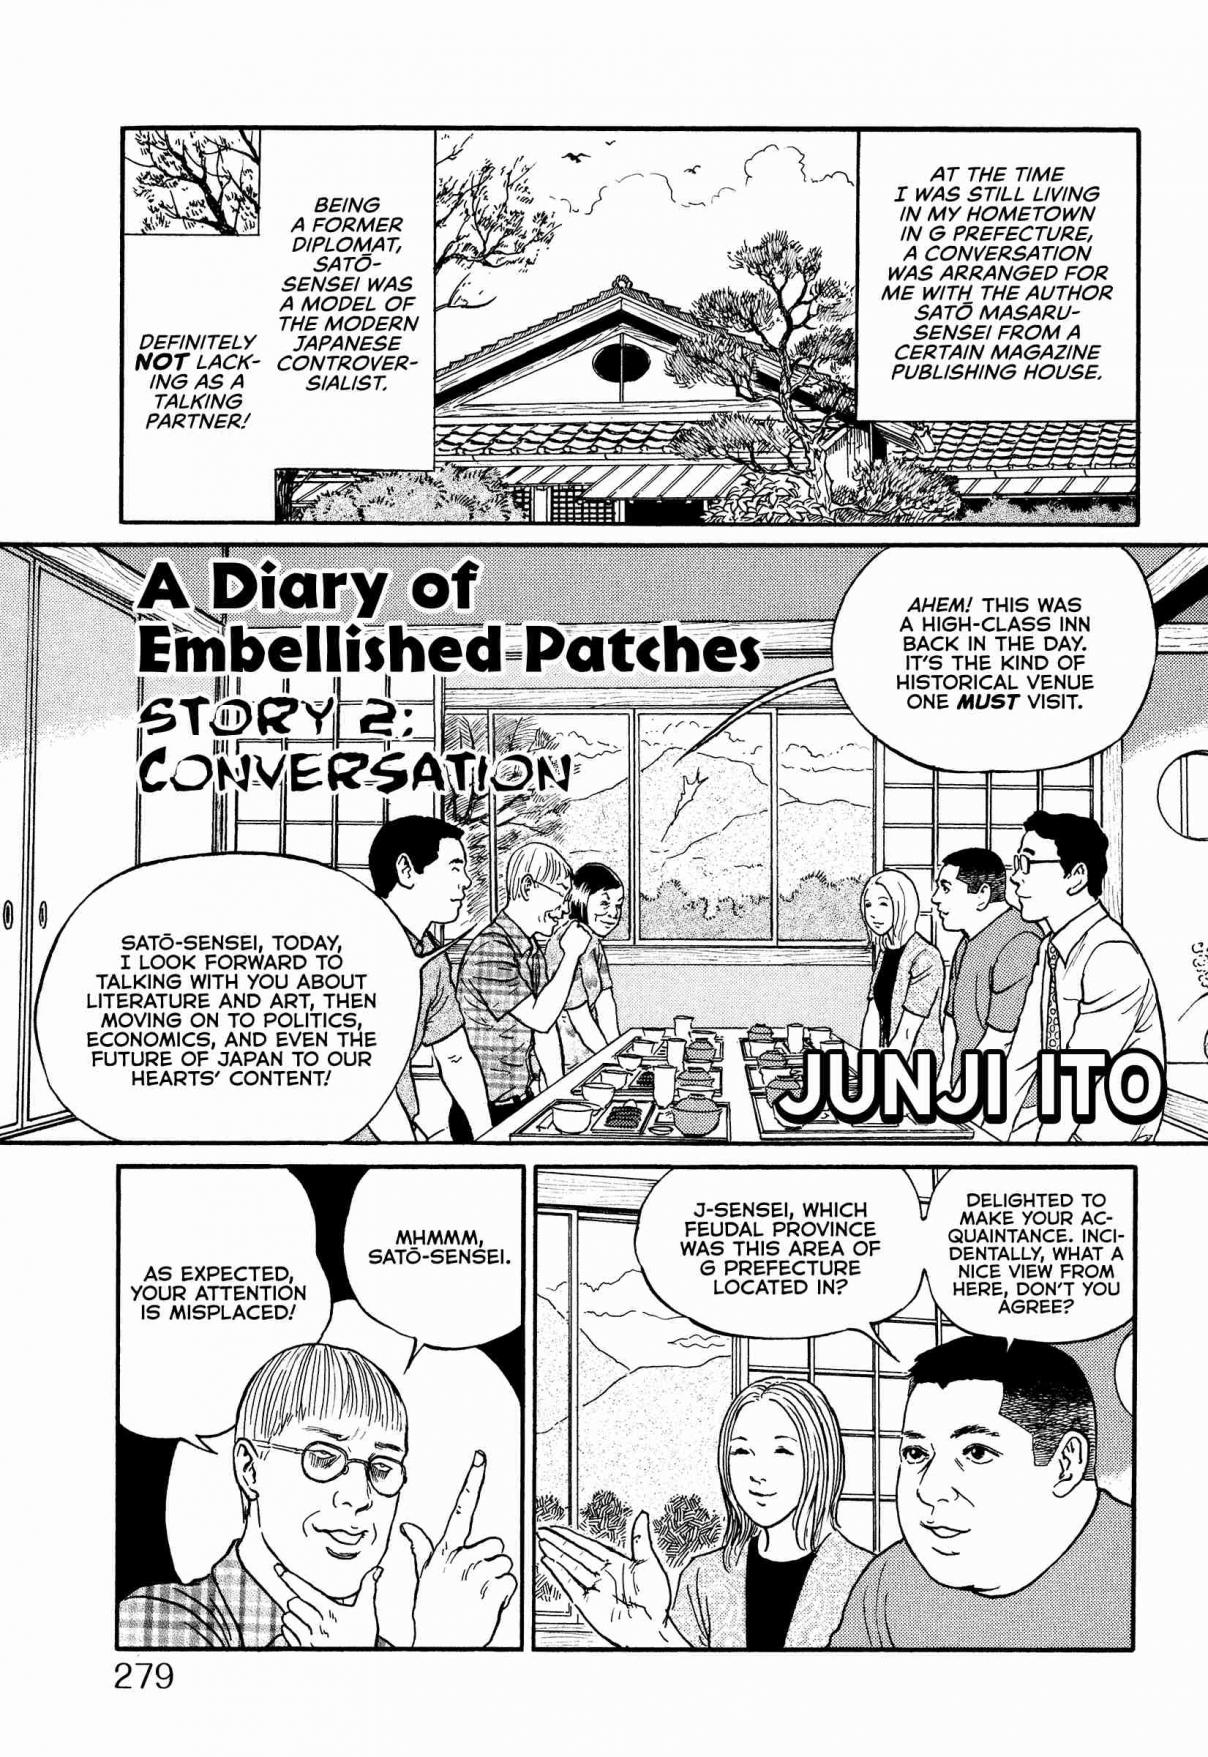 A Diary of Embellished Patches Ch. 2 Conversation